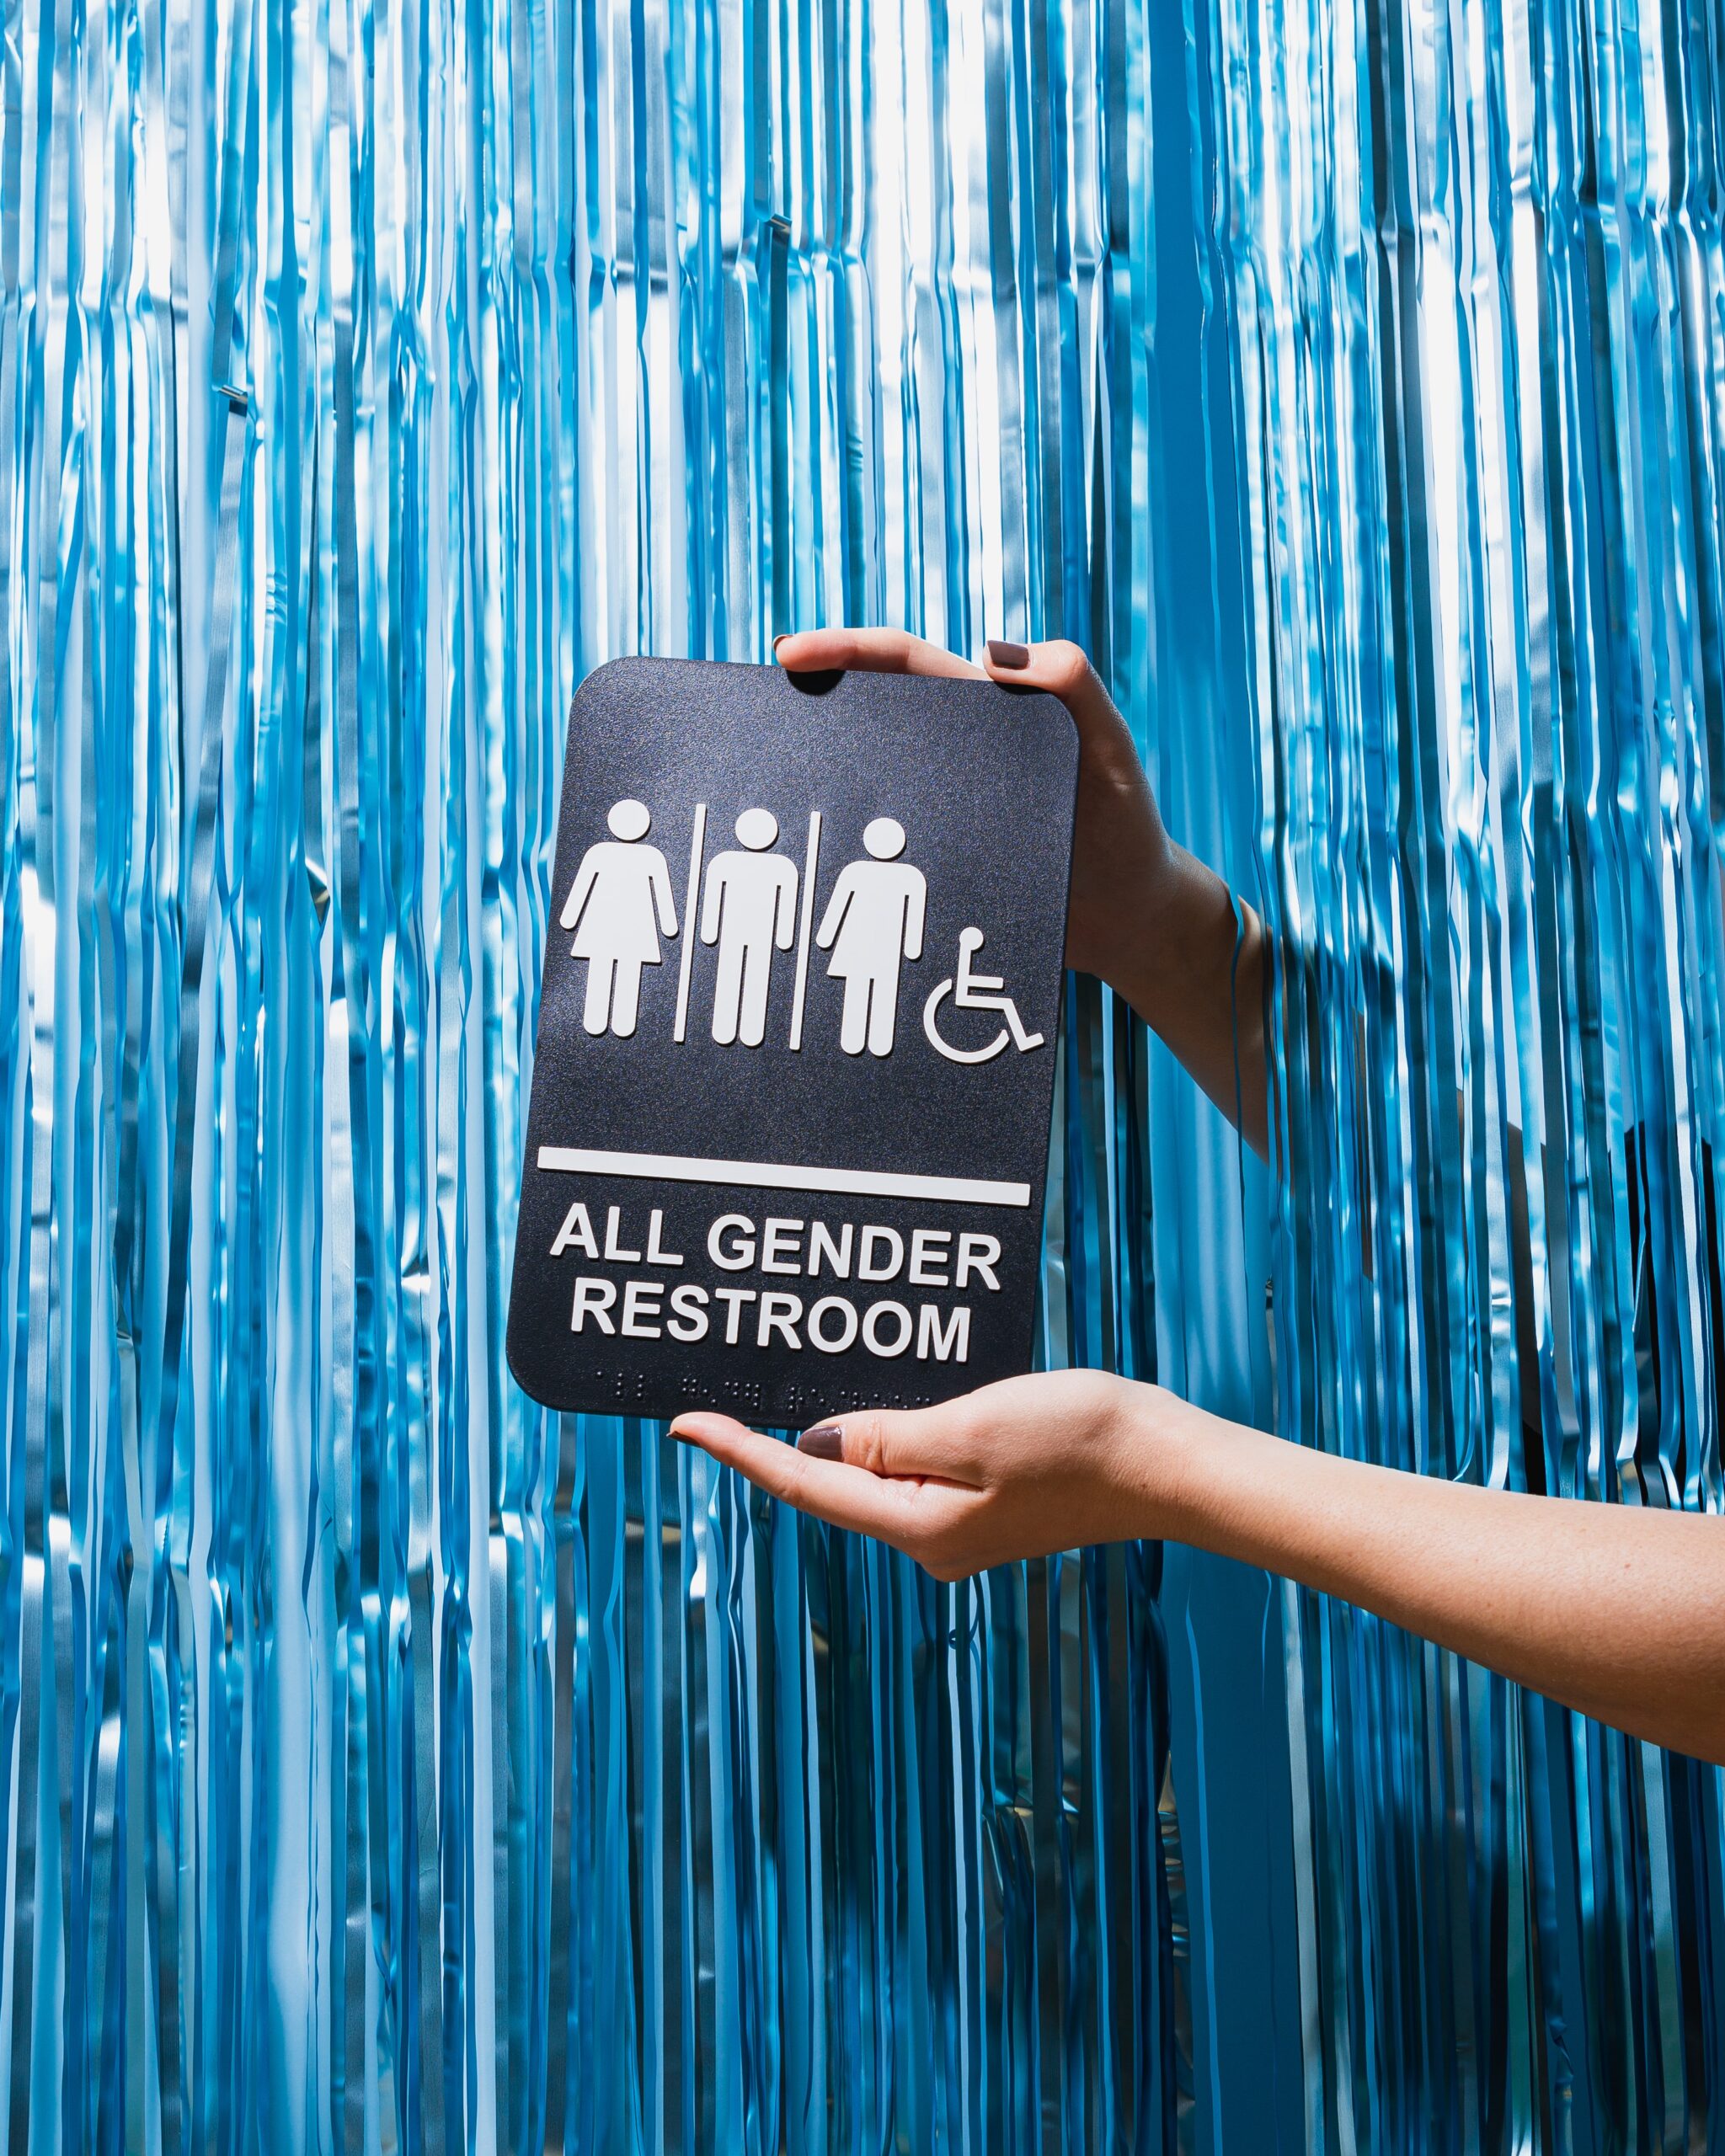 The Importance of Gender Neutral Bathrooms